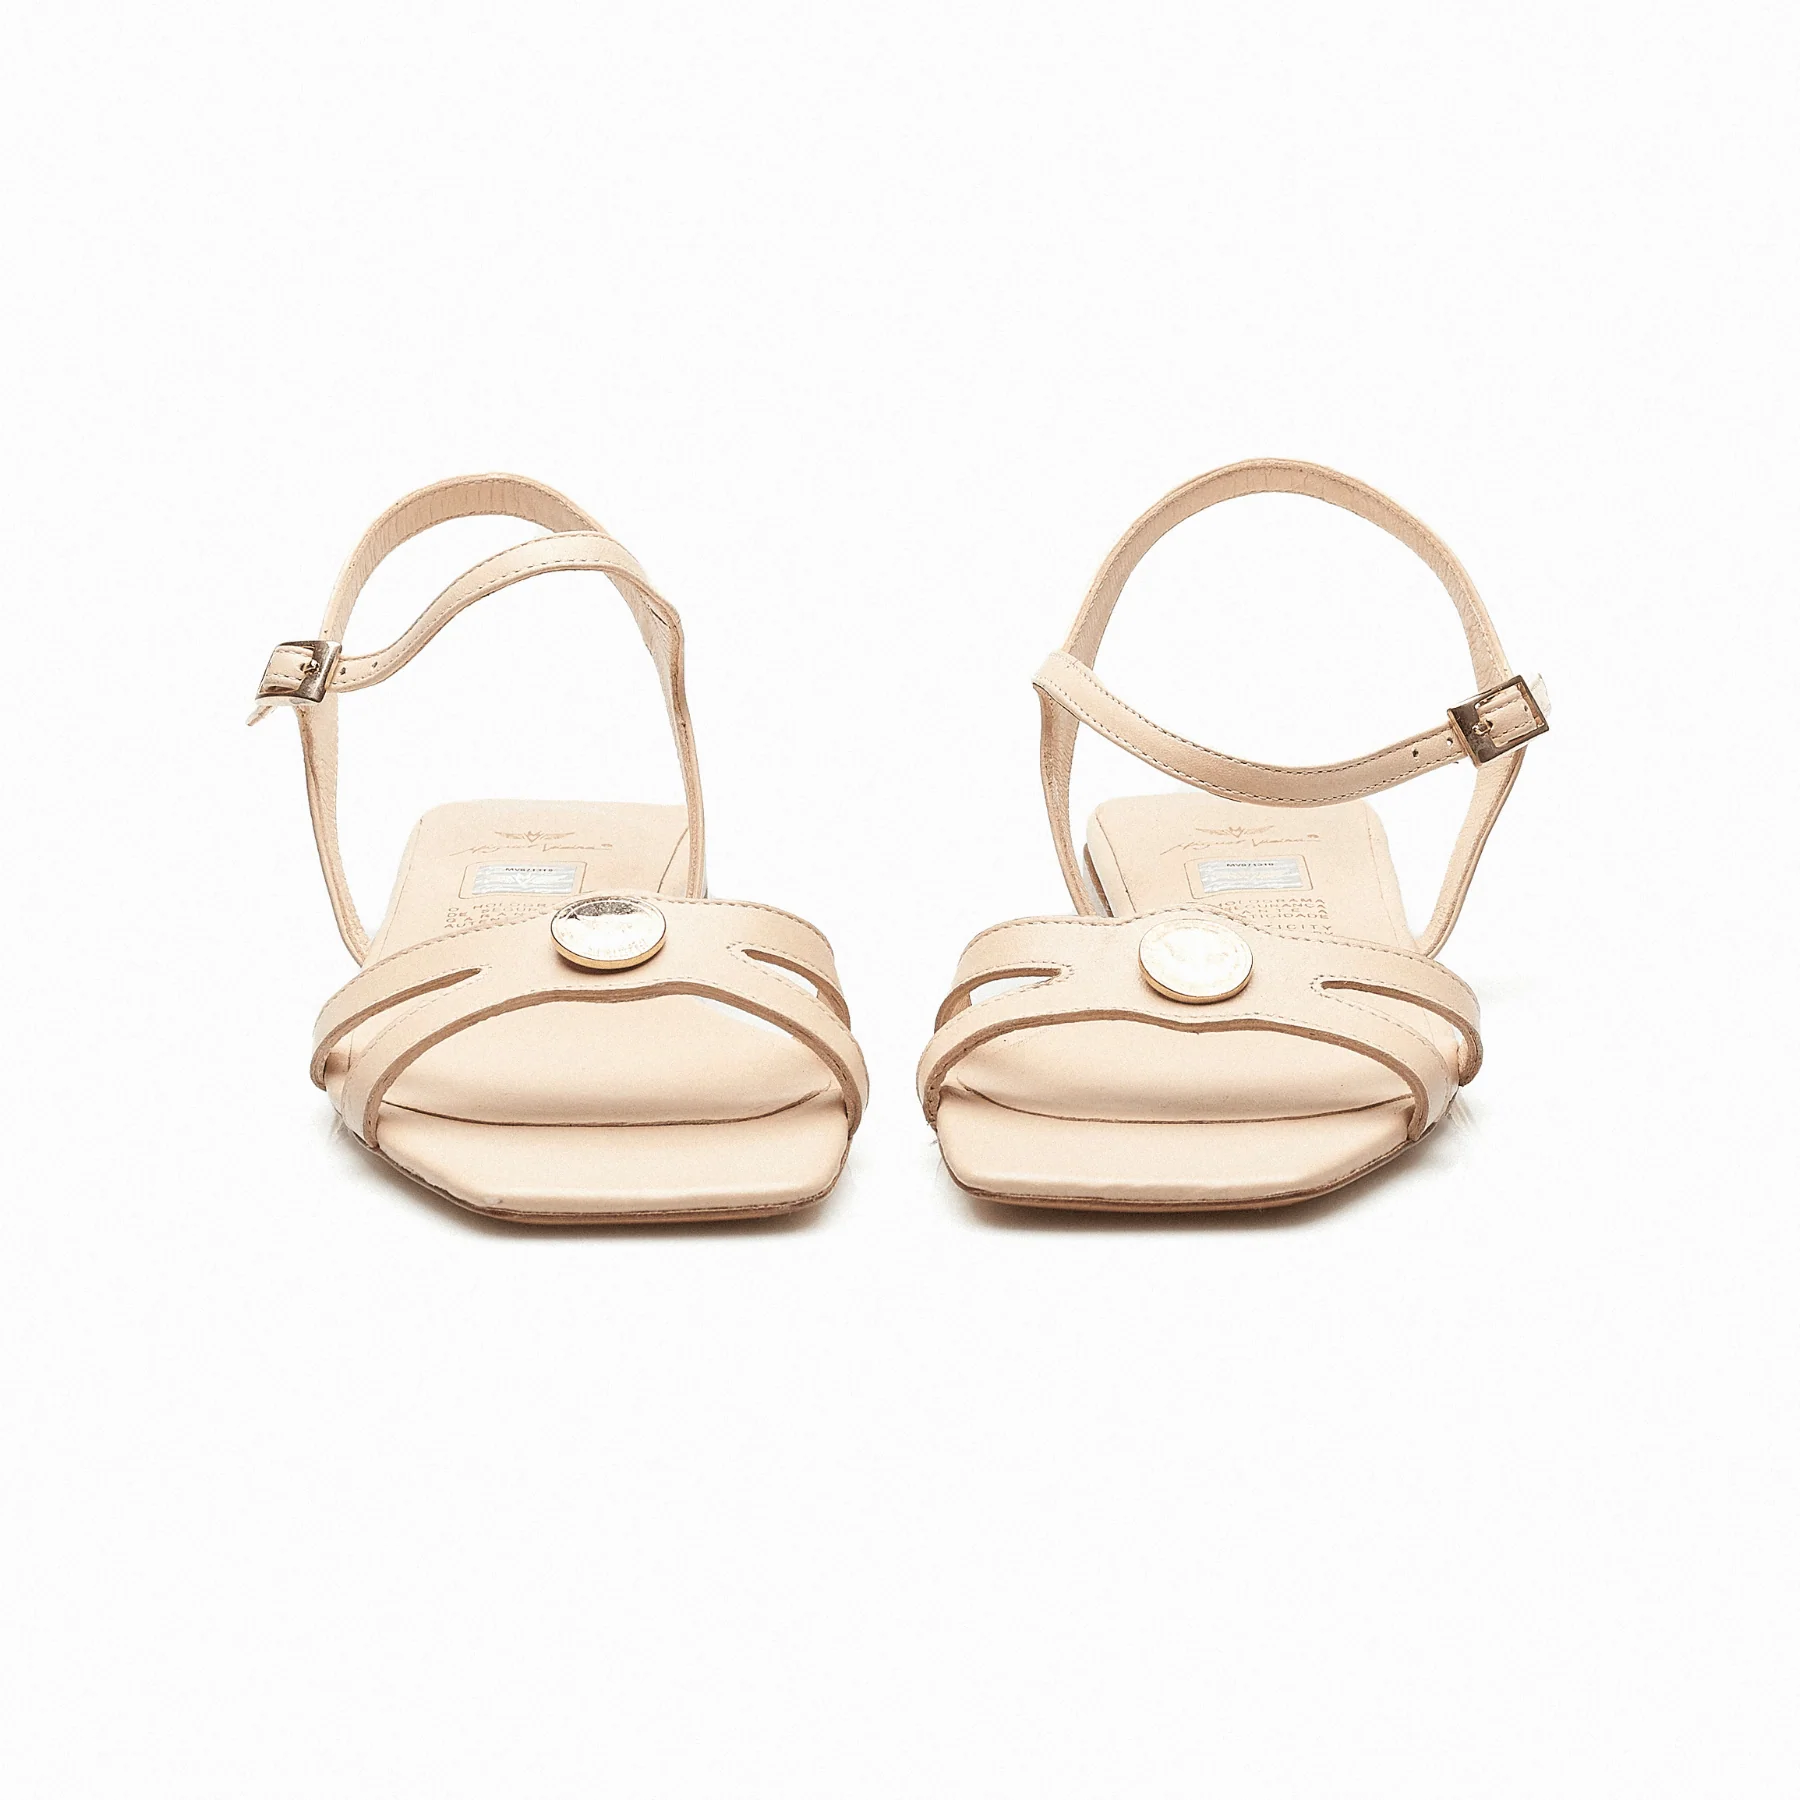 Flat Sandals with Round Metallic Accessory